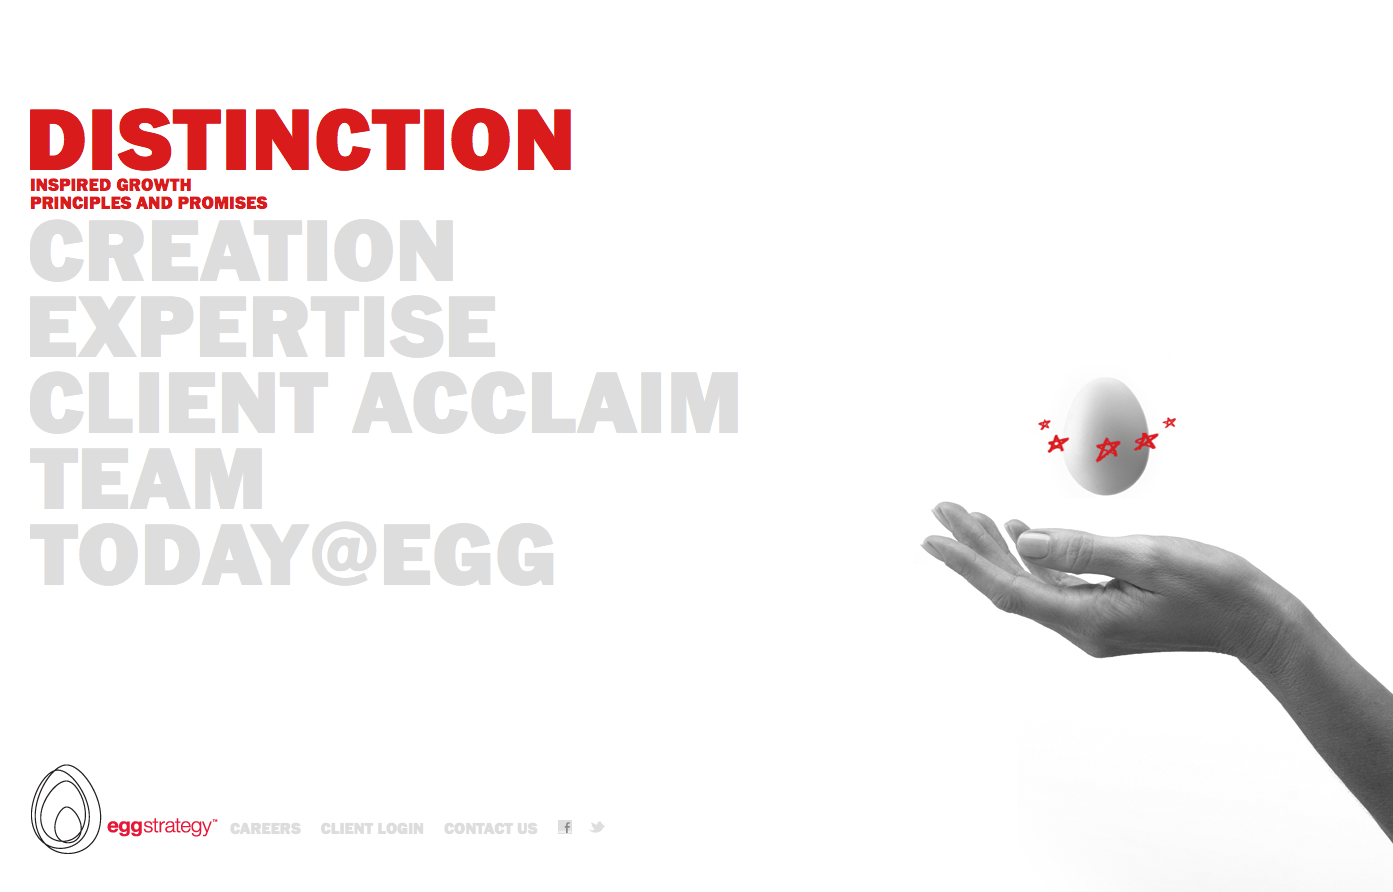 Project image 1 for Website, Egg Strategy